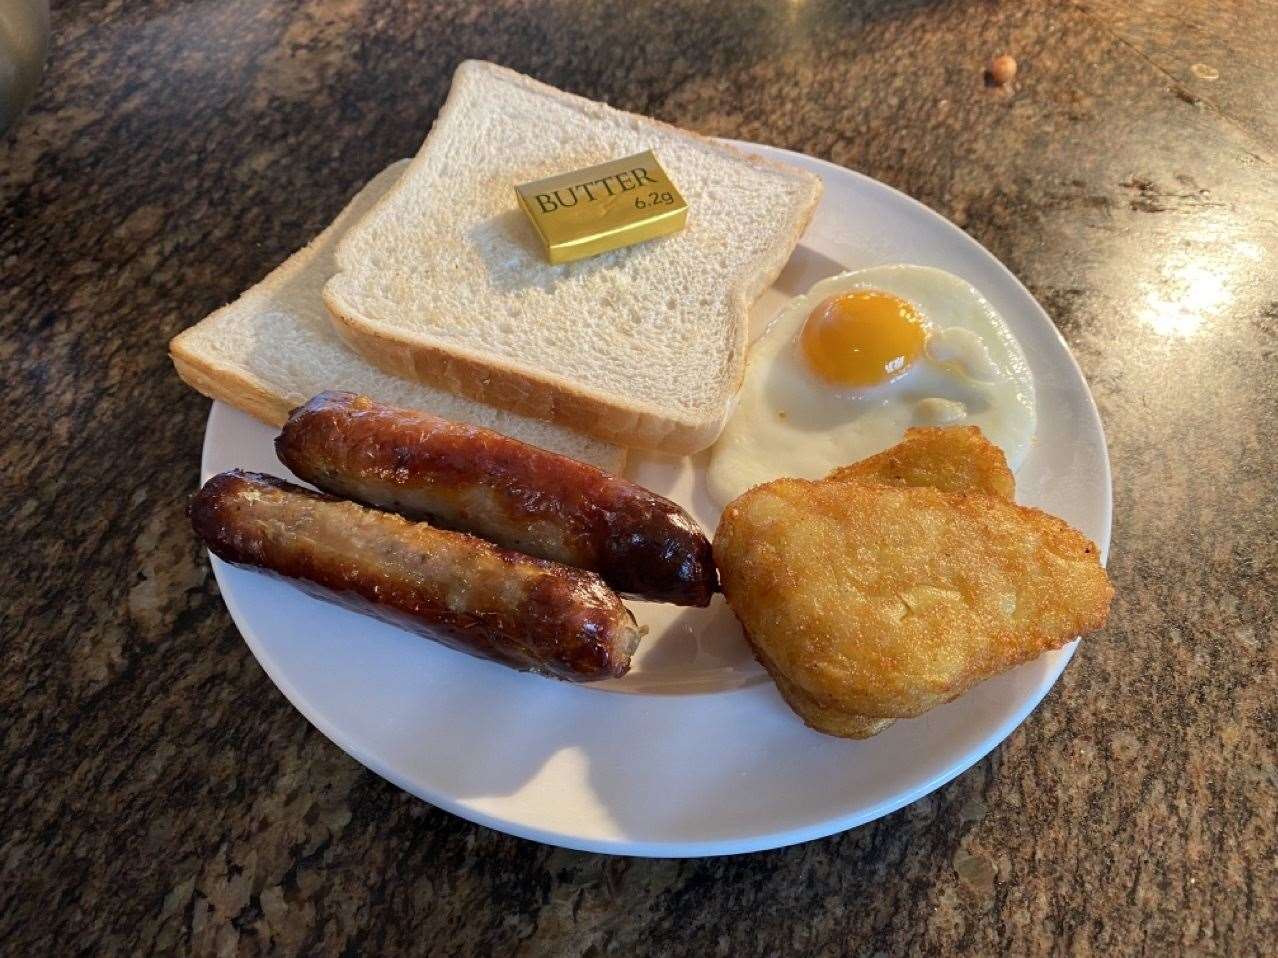 A breakfast meal was included in my reservation